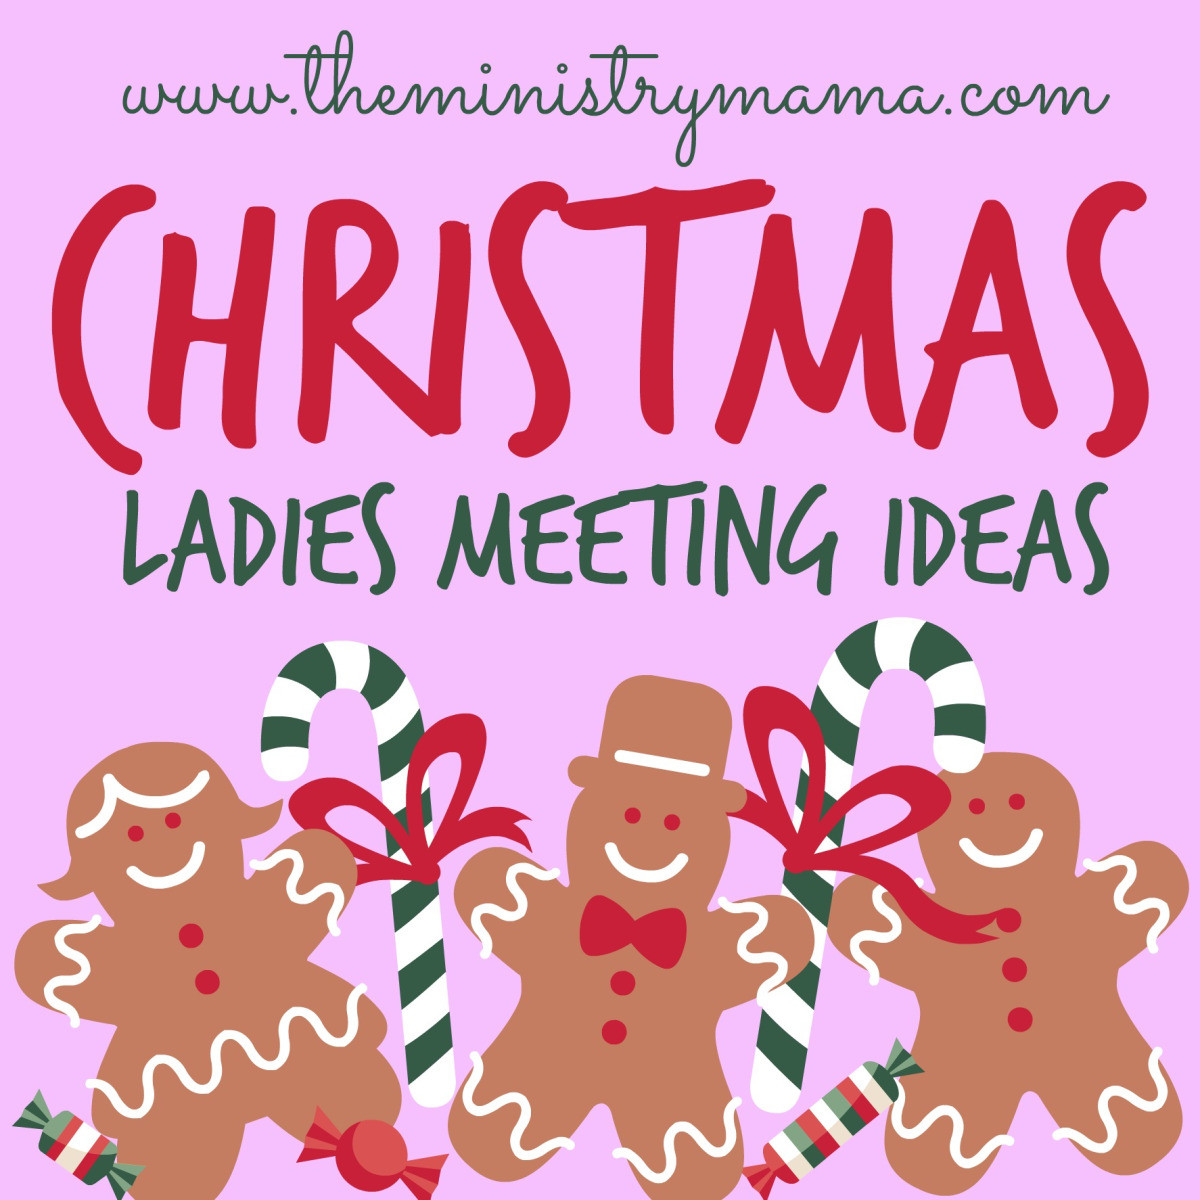 Women'S Ministry Christmas Party Ideas
 Christmas La s Meeting Ideas – The Ministry Mama